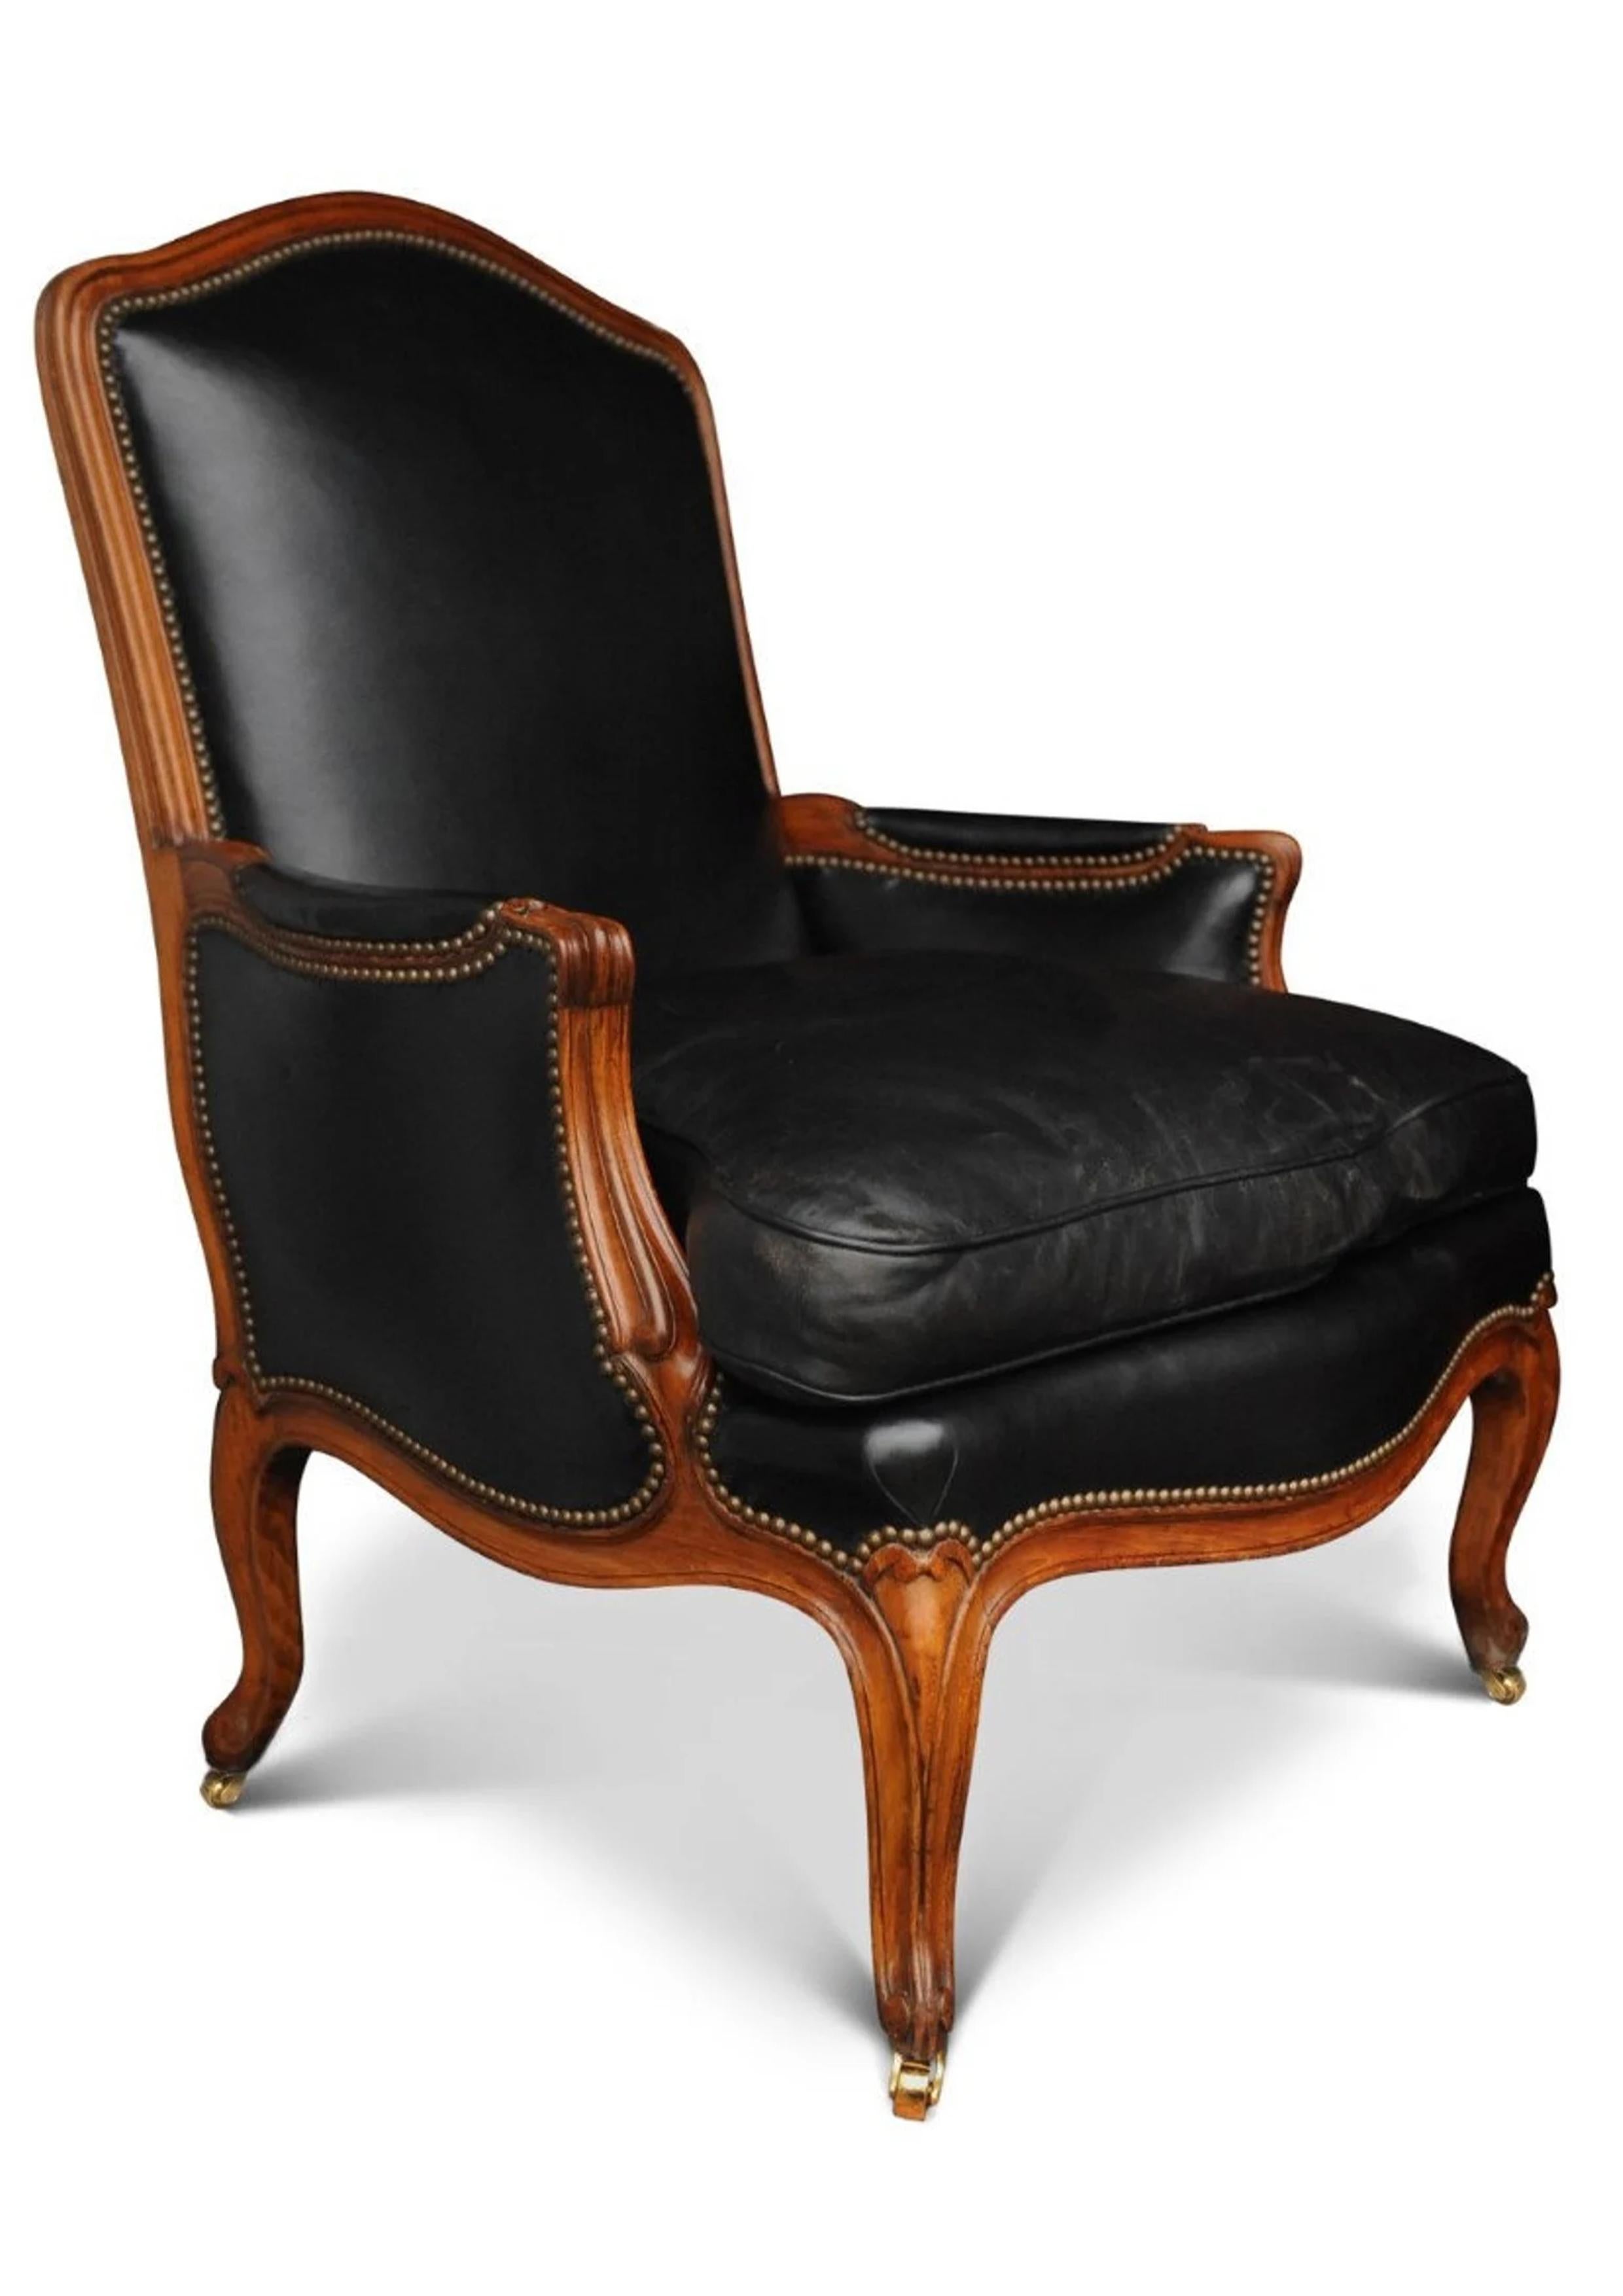 A black leather Louis XV French Bergere armchair finished with brass stud detailing

Measure: Height to seat 47cm.